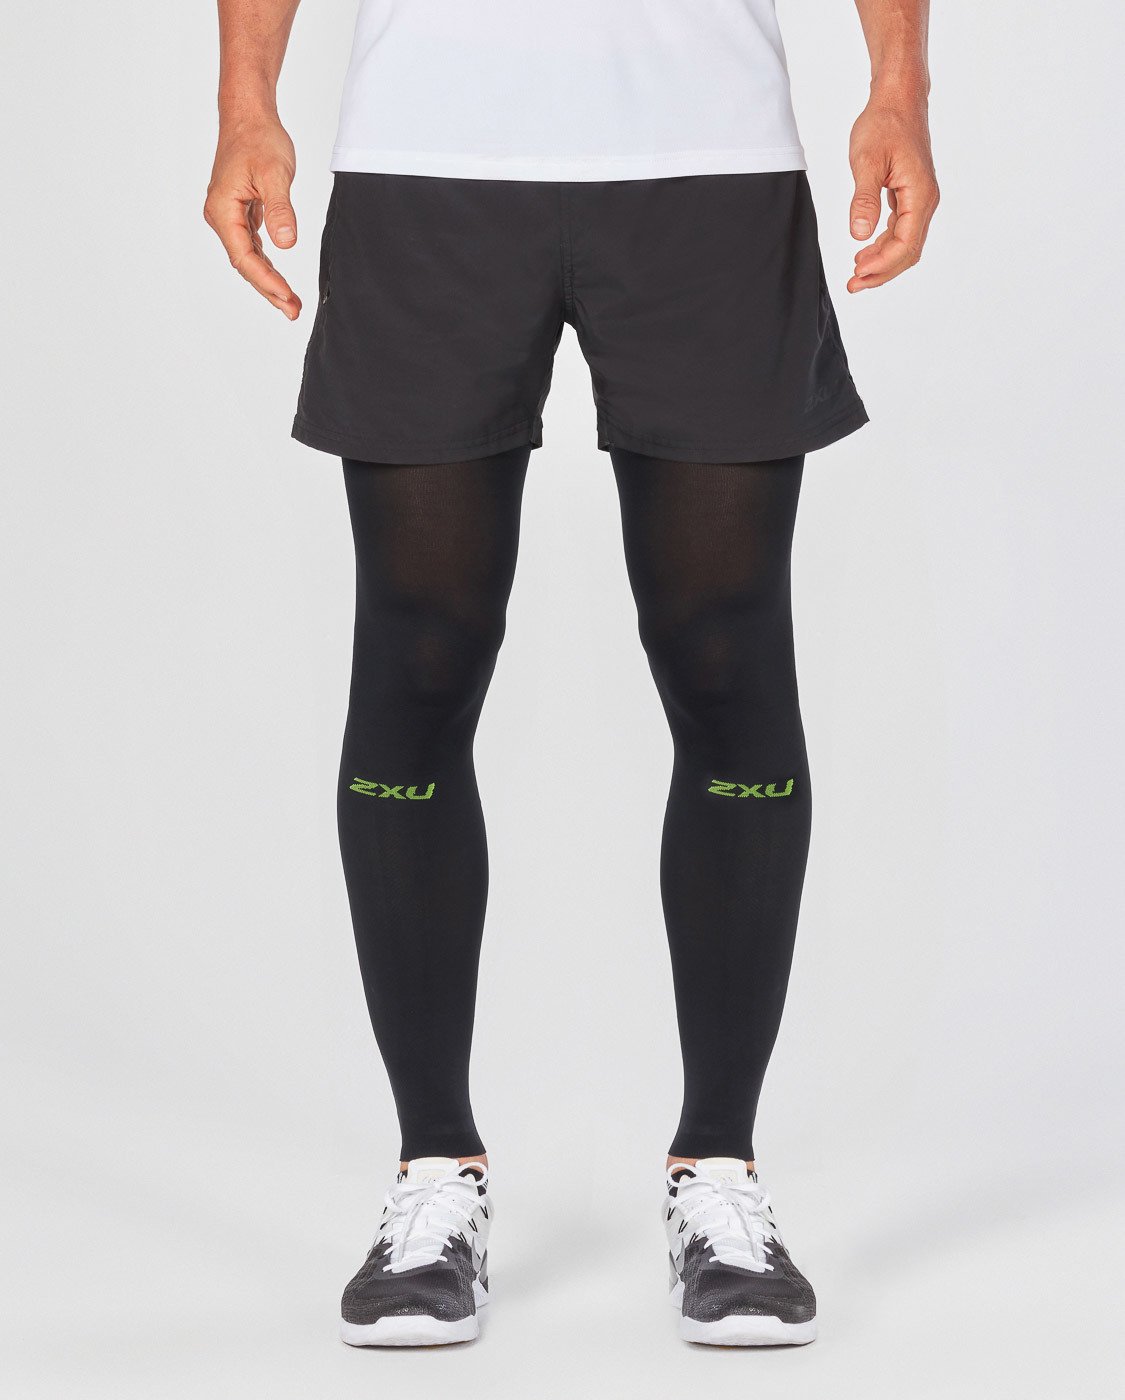 Leg Compression Sleeves for Recovery